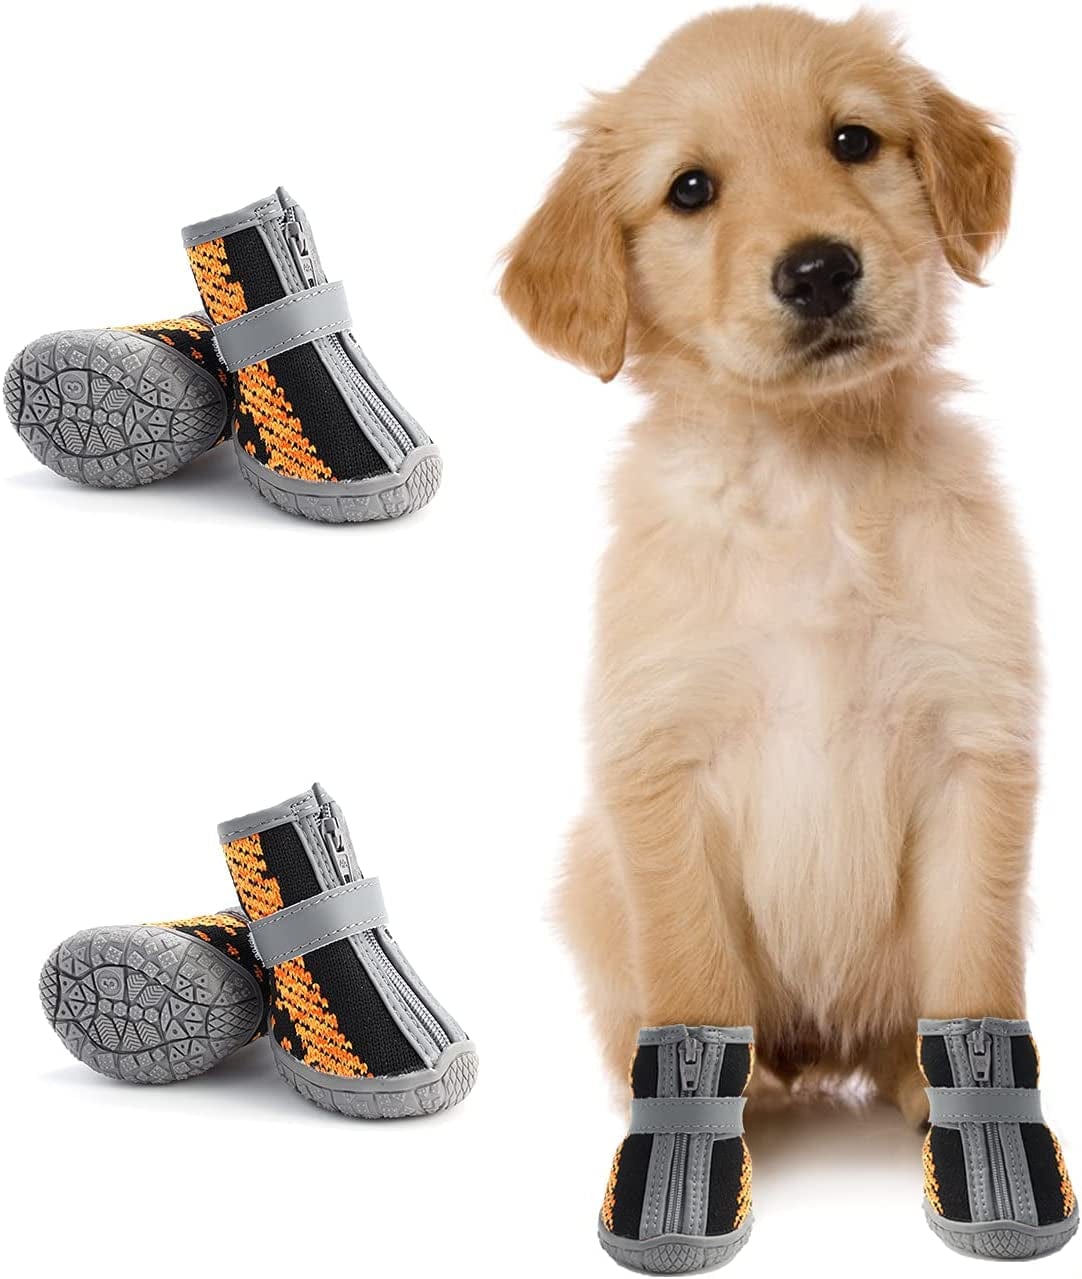 Dog Shoes for Hot Pavement Hardwood Floors, Breathable Dog Boots with – KOL  PET